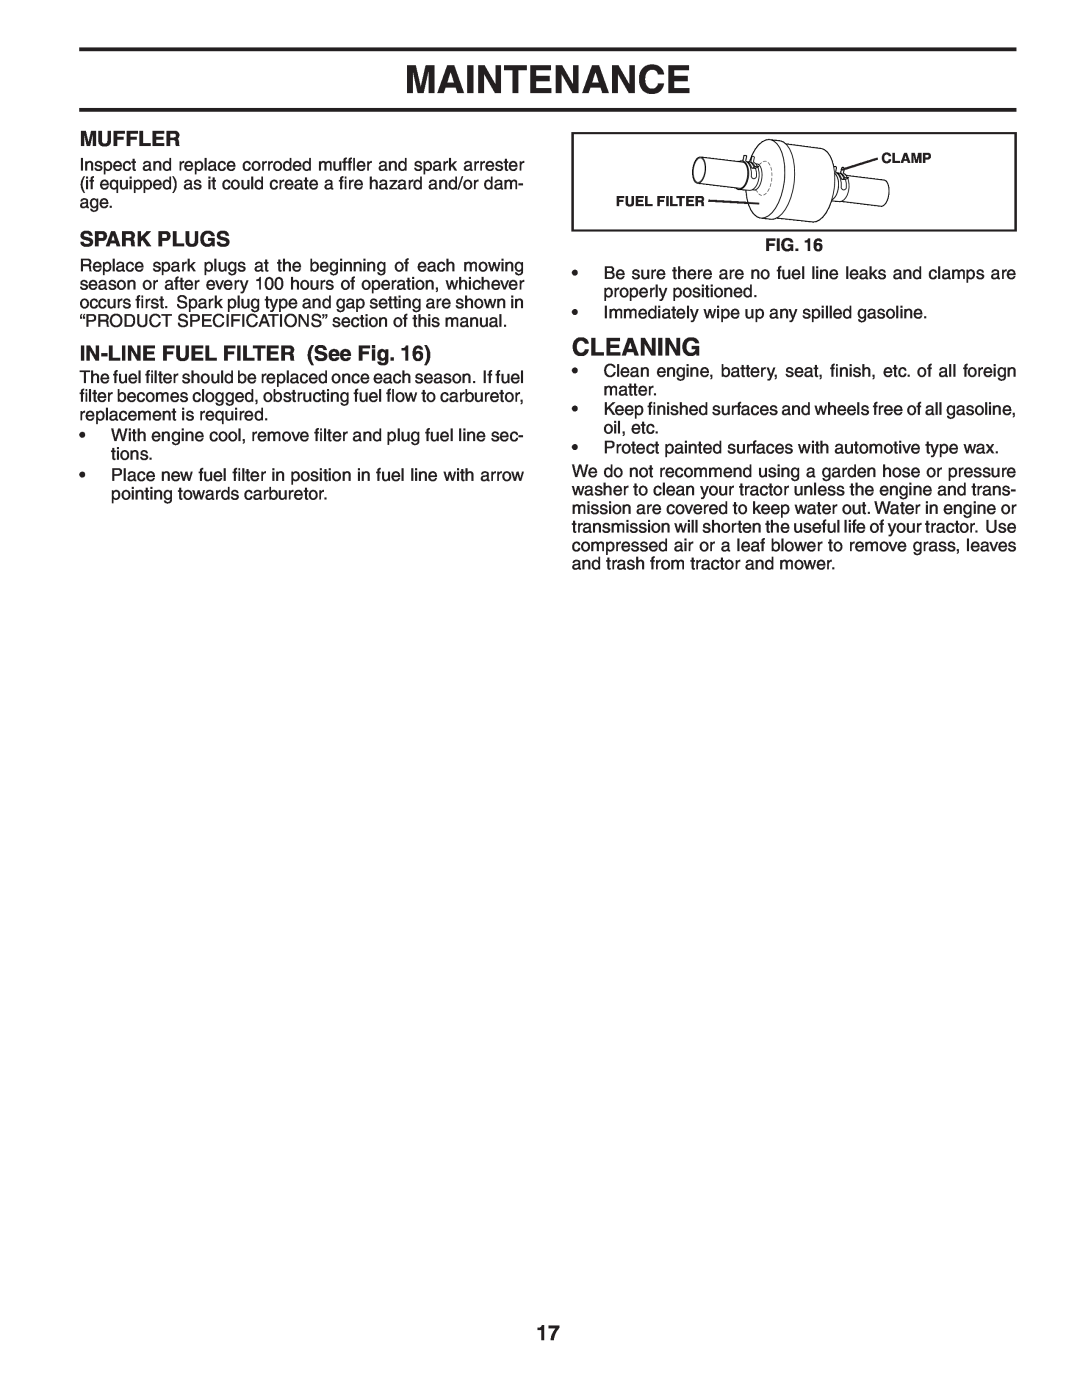 Poulan 960420022, 404402 manual Cleaning, Muffler, Spark Plugs, IN-LINEFUEL FILTER See Fig, Maintenance 